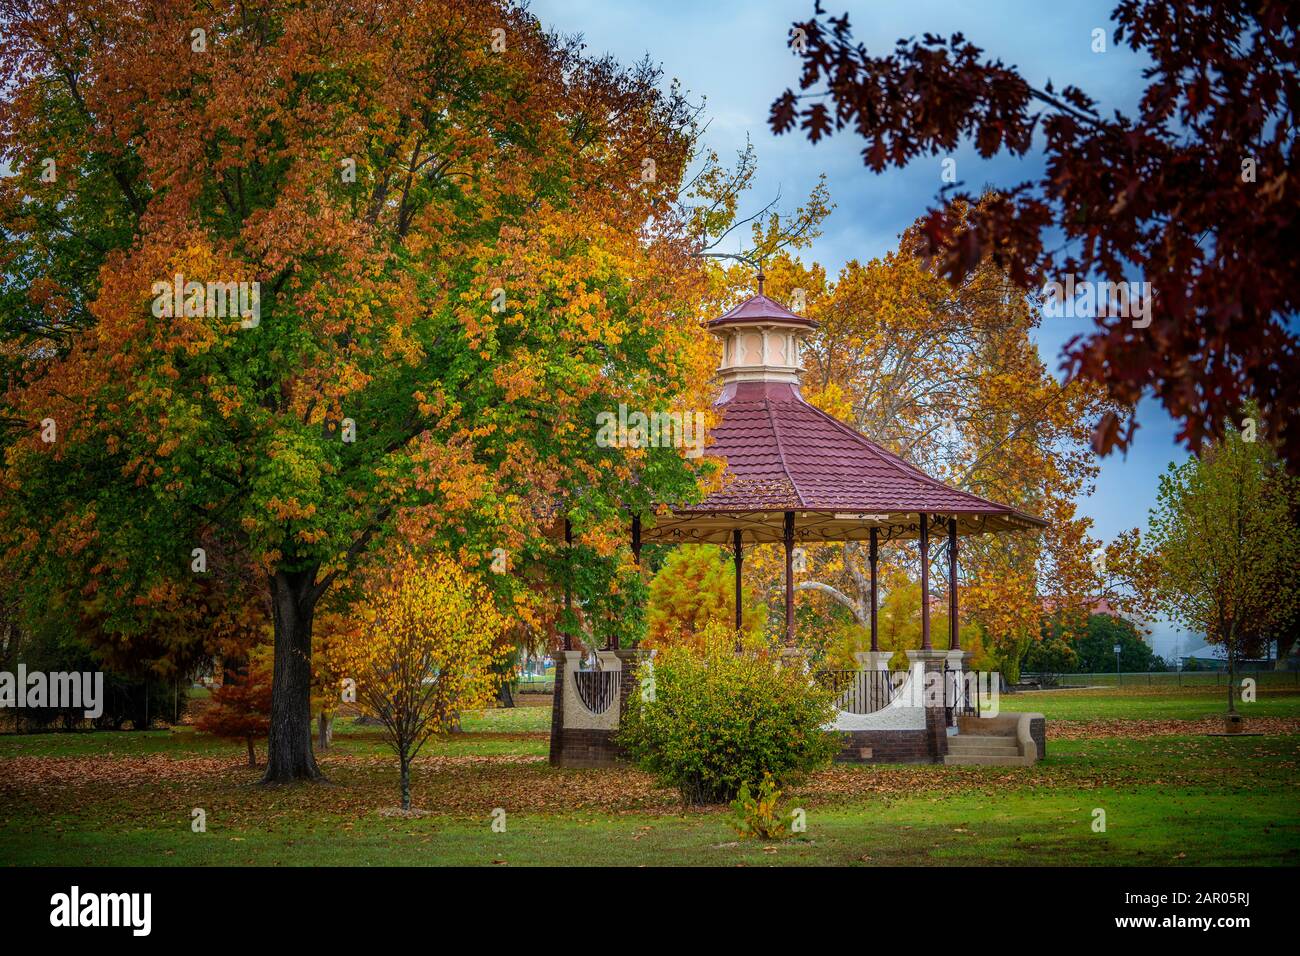 Rotunda and changing autumn leaves in Anzac Park Glen Innes NSW Stock Photo